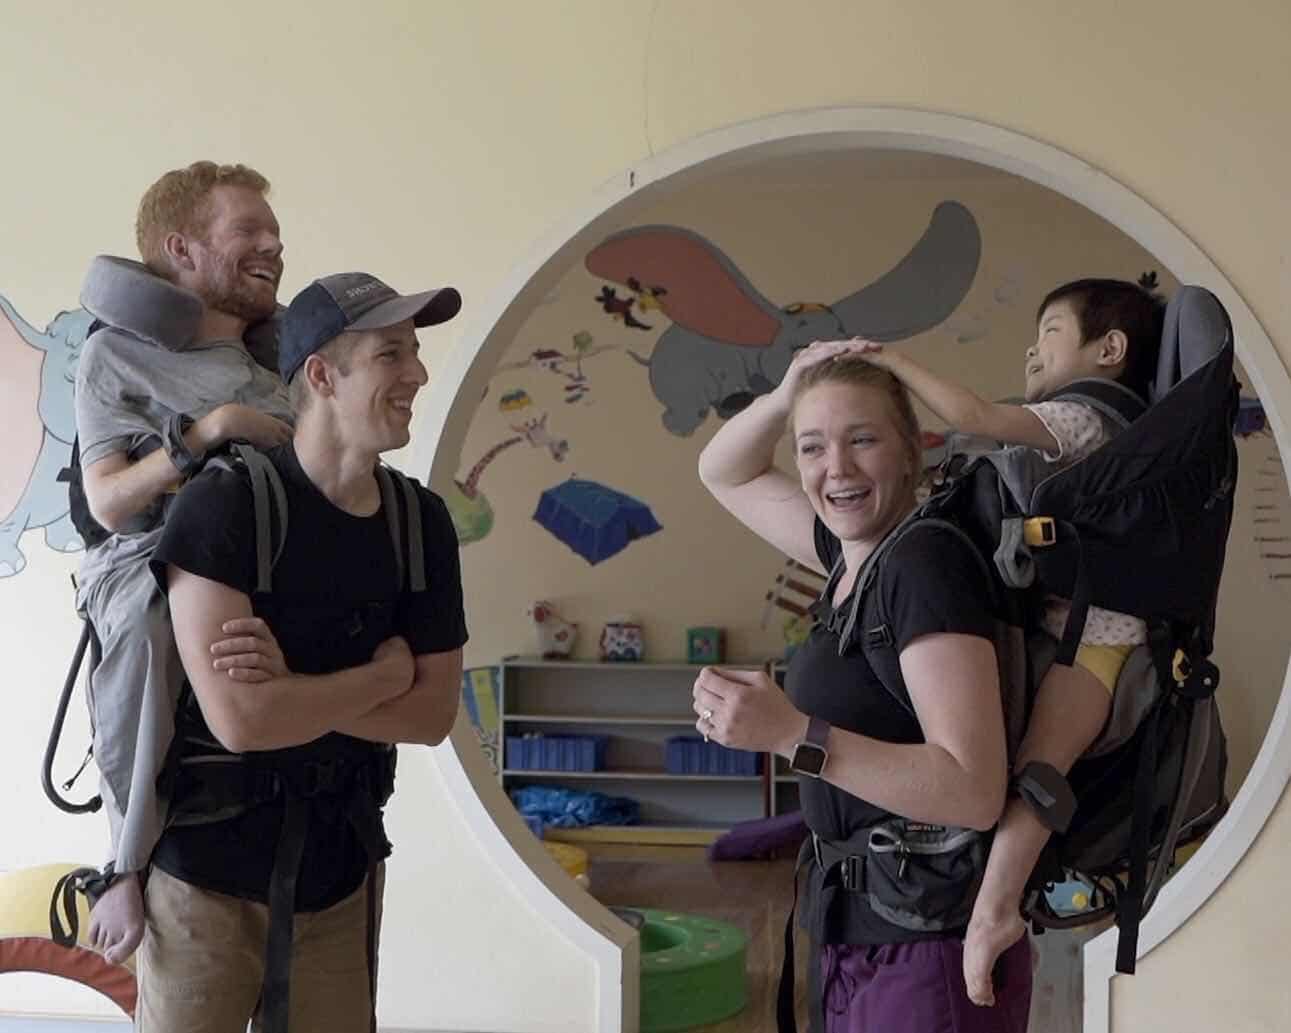 A man carrying Kevan in his backpack. Across from him stands a woman carrying a child in a backpack. The child has its hand on top of the woman's head and they're both laughing.